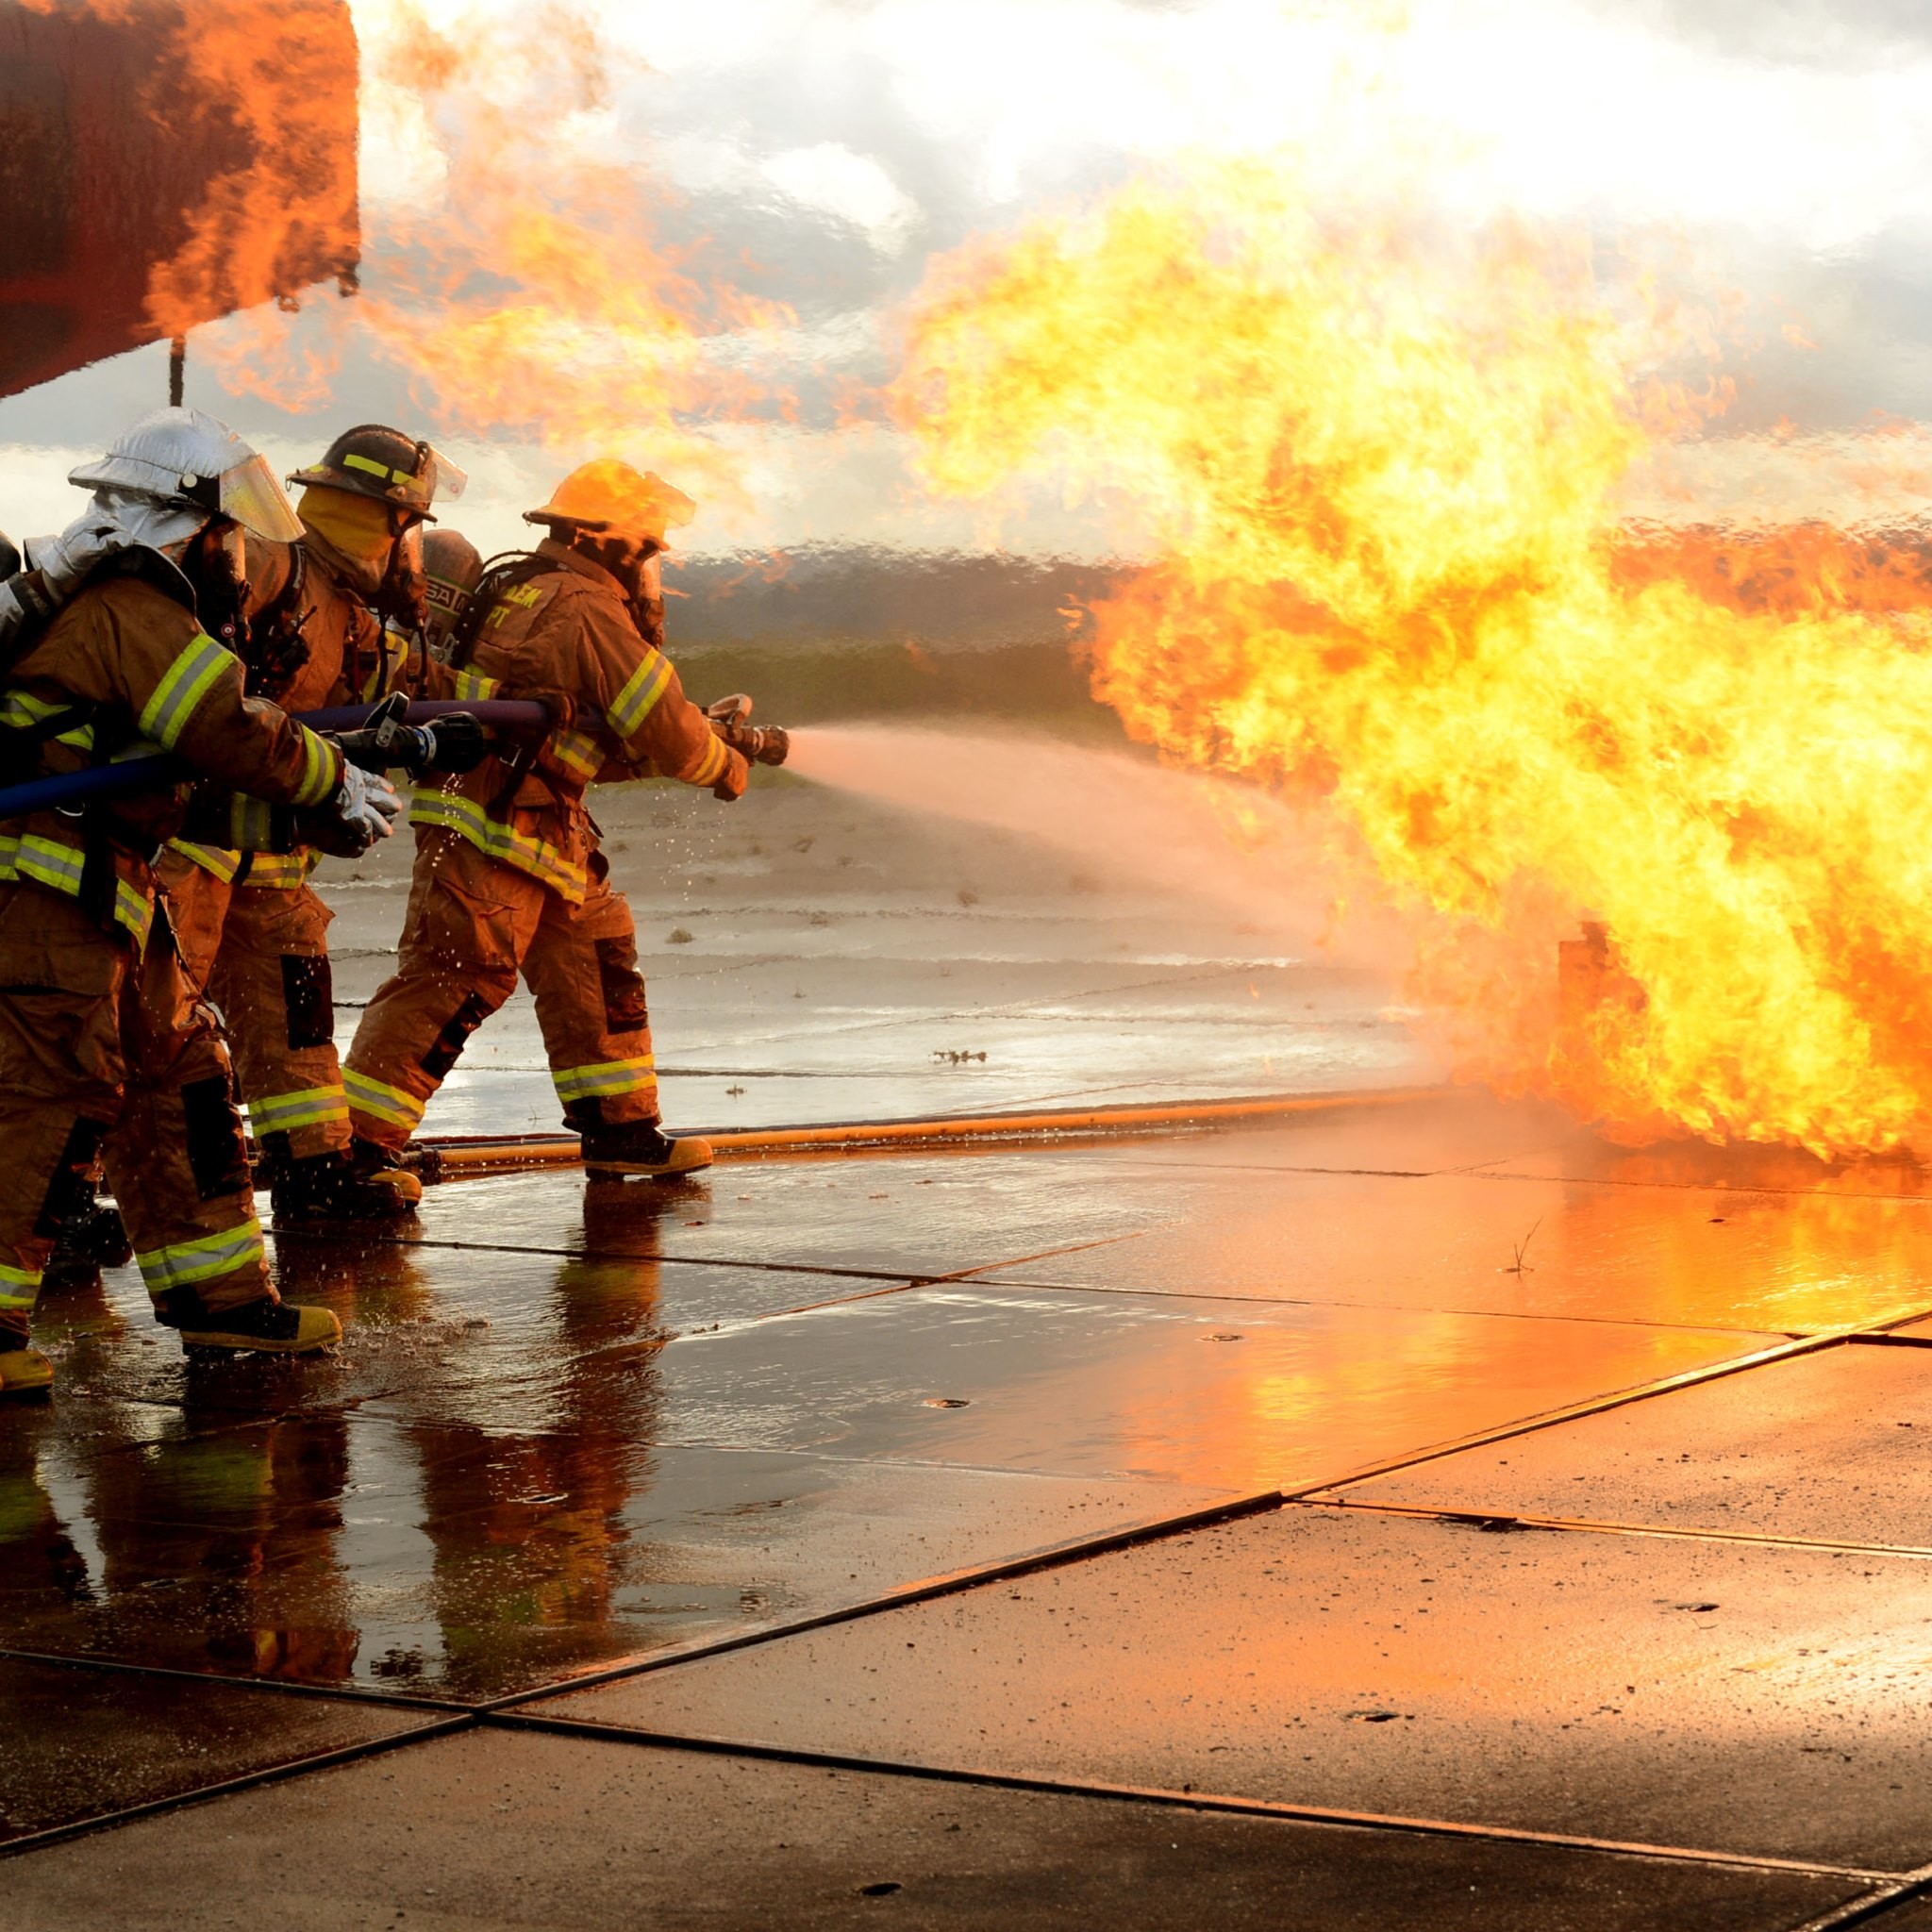 2048x2048 HD Wallpaper: Firefighters Exercise